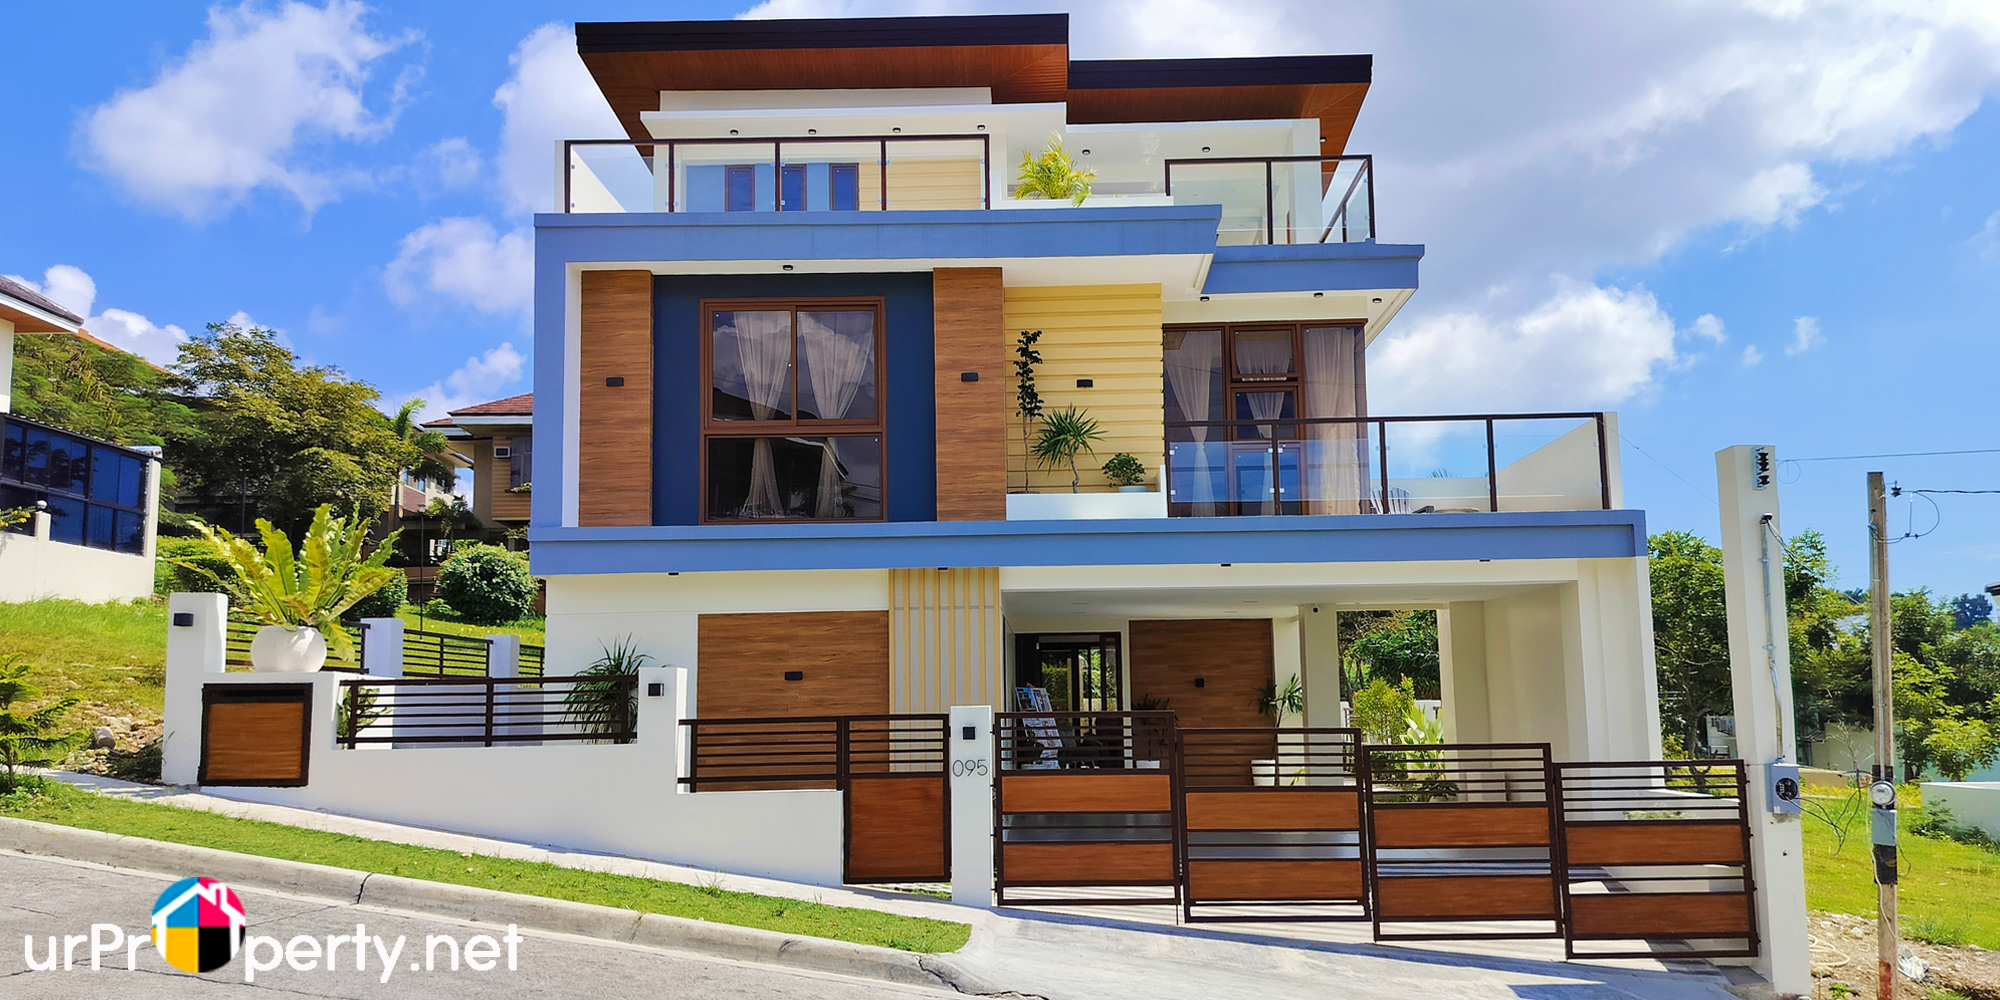 FOR SALE MODERN HOUSE WITH POOL PLUS OVERLOOKING VIEW IN KISHANTA TALISAY CEBU